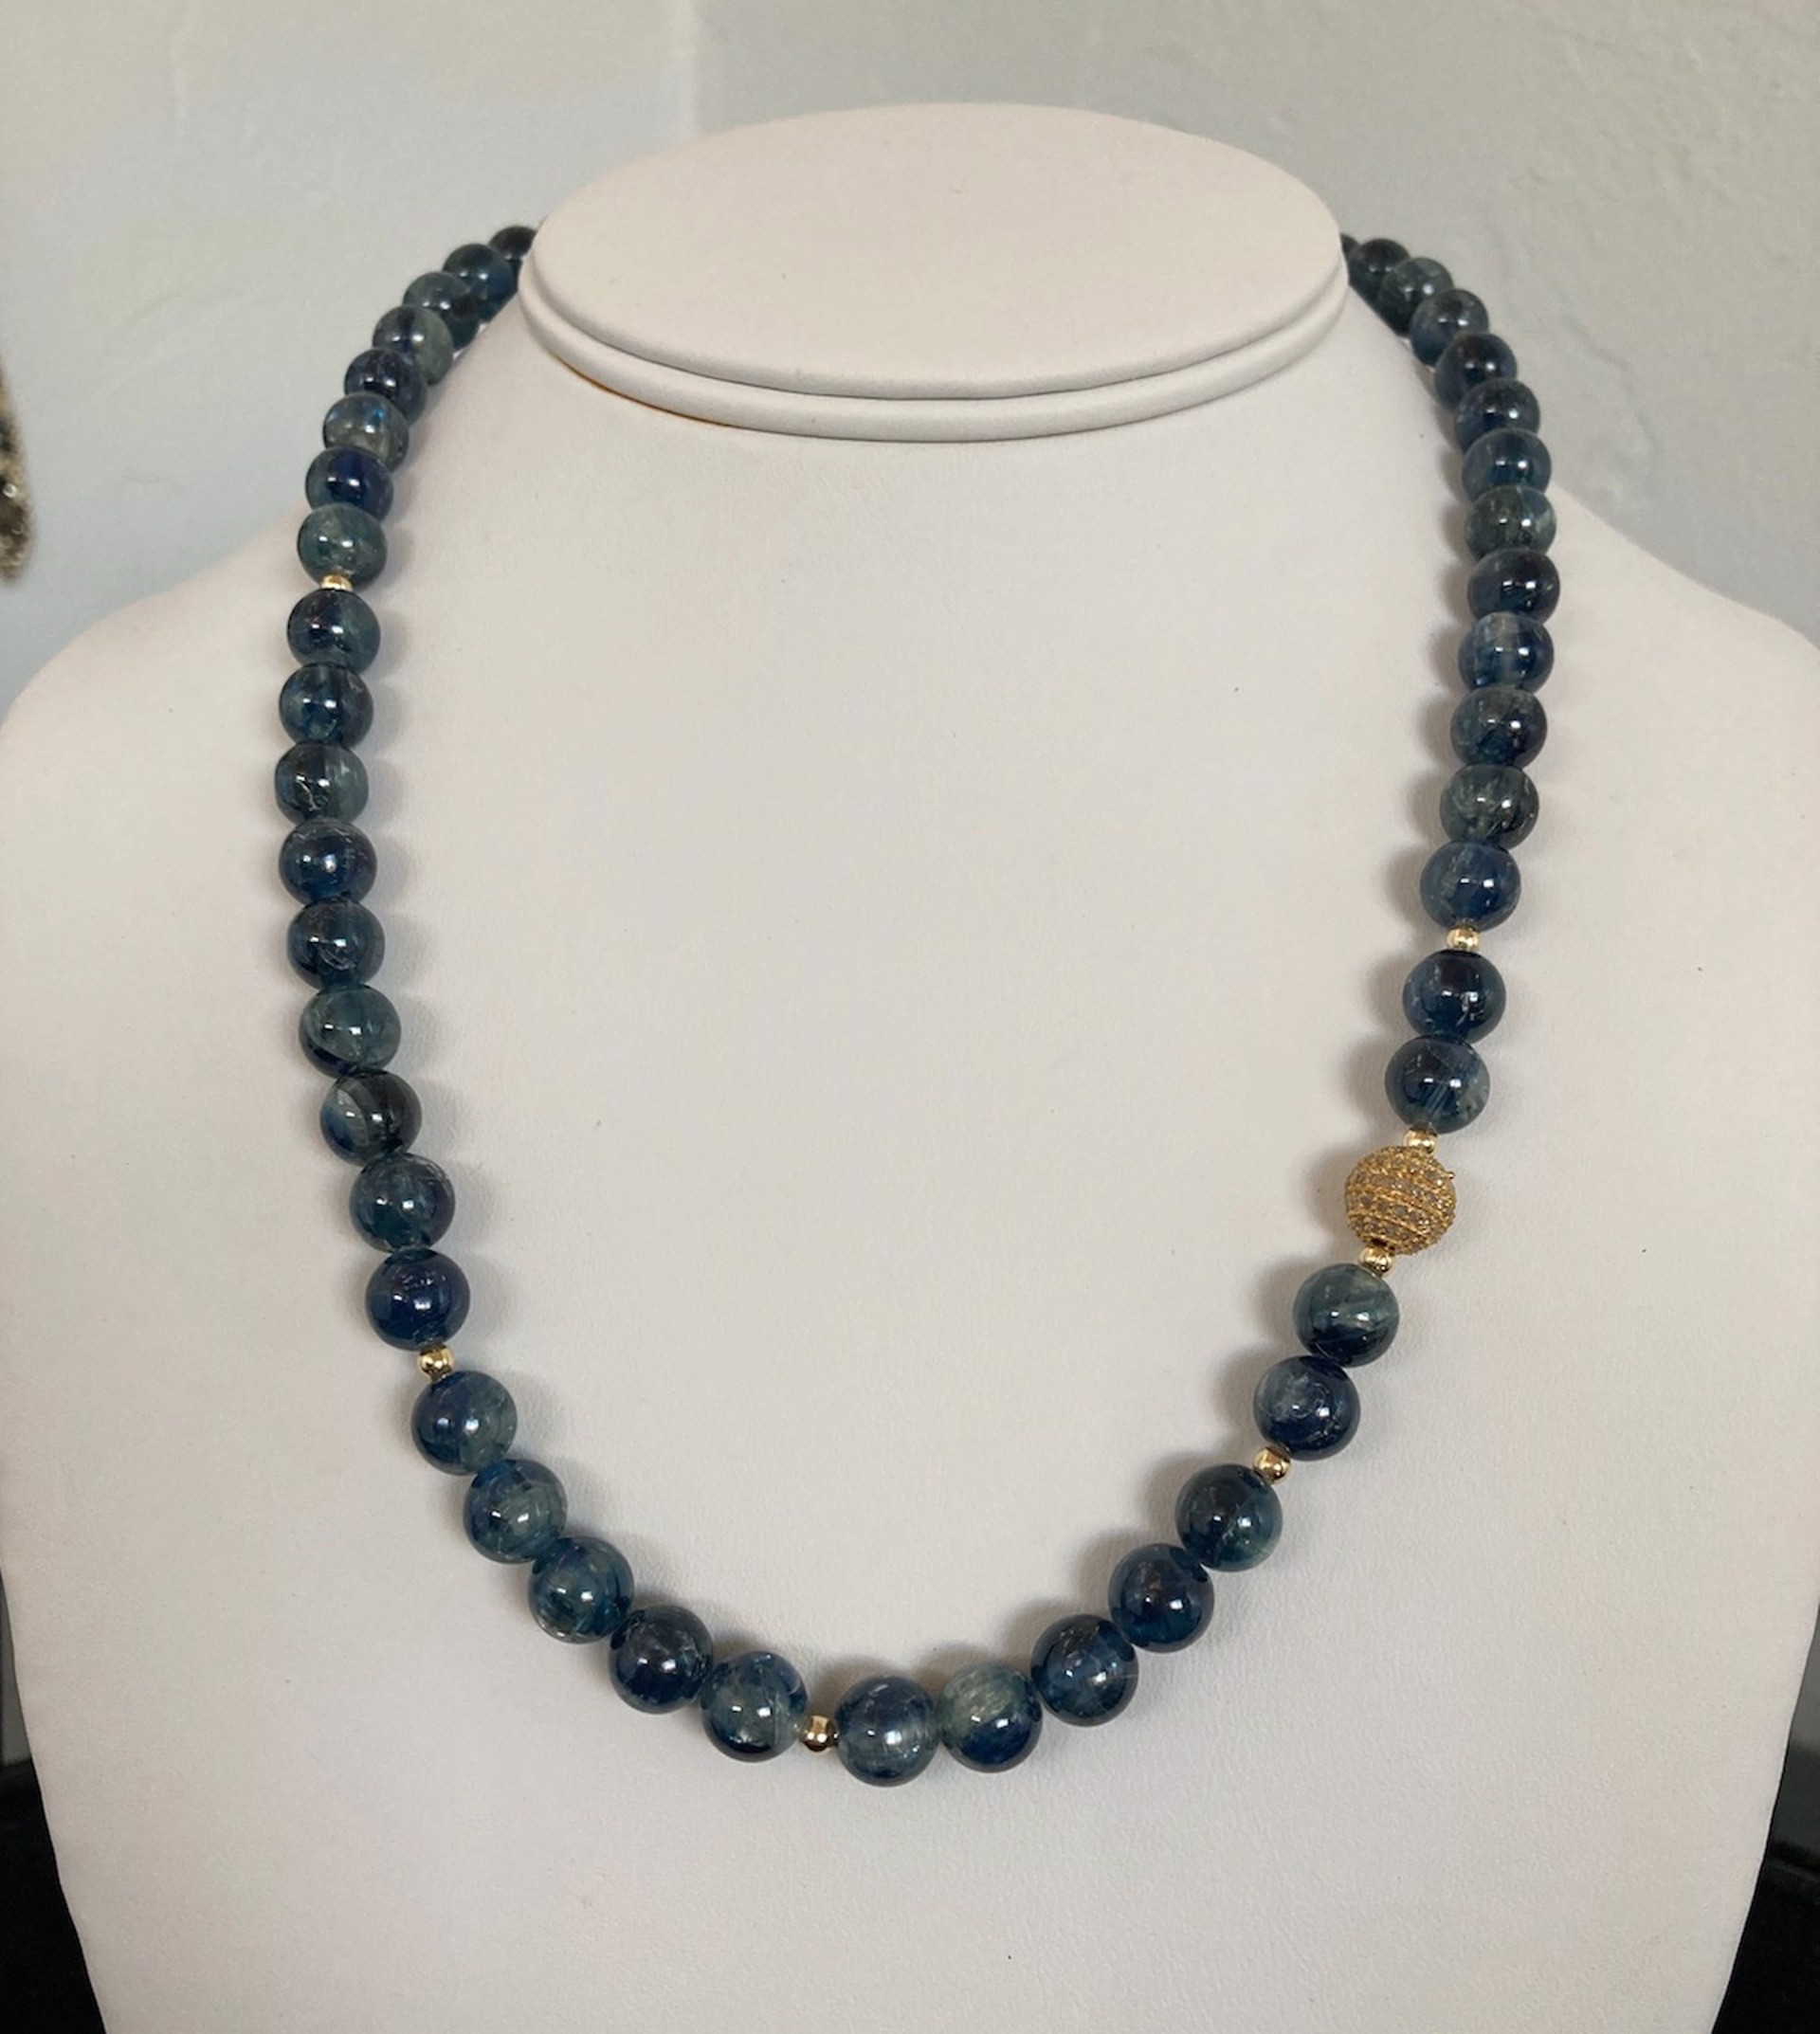 Necklace - Blue Kyanitewith Diamond Bead and Vermeil by Bonnie Jaus